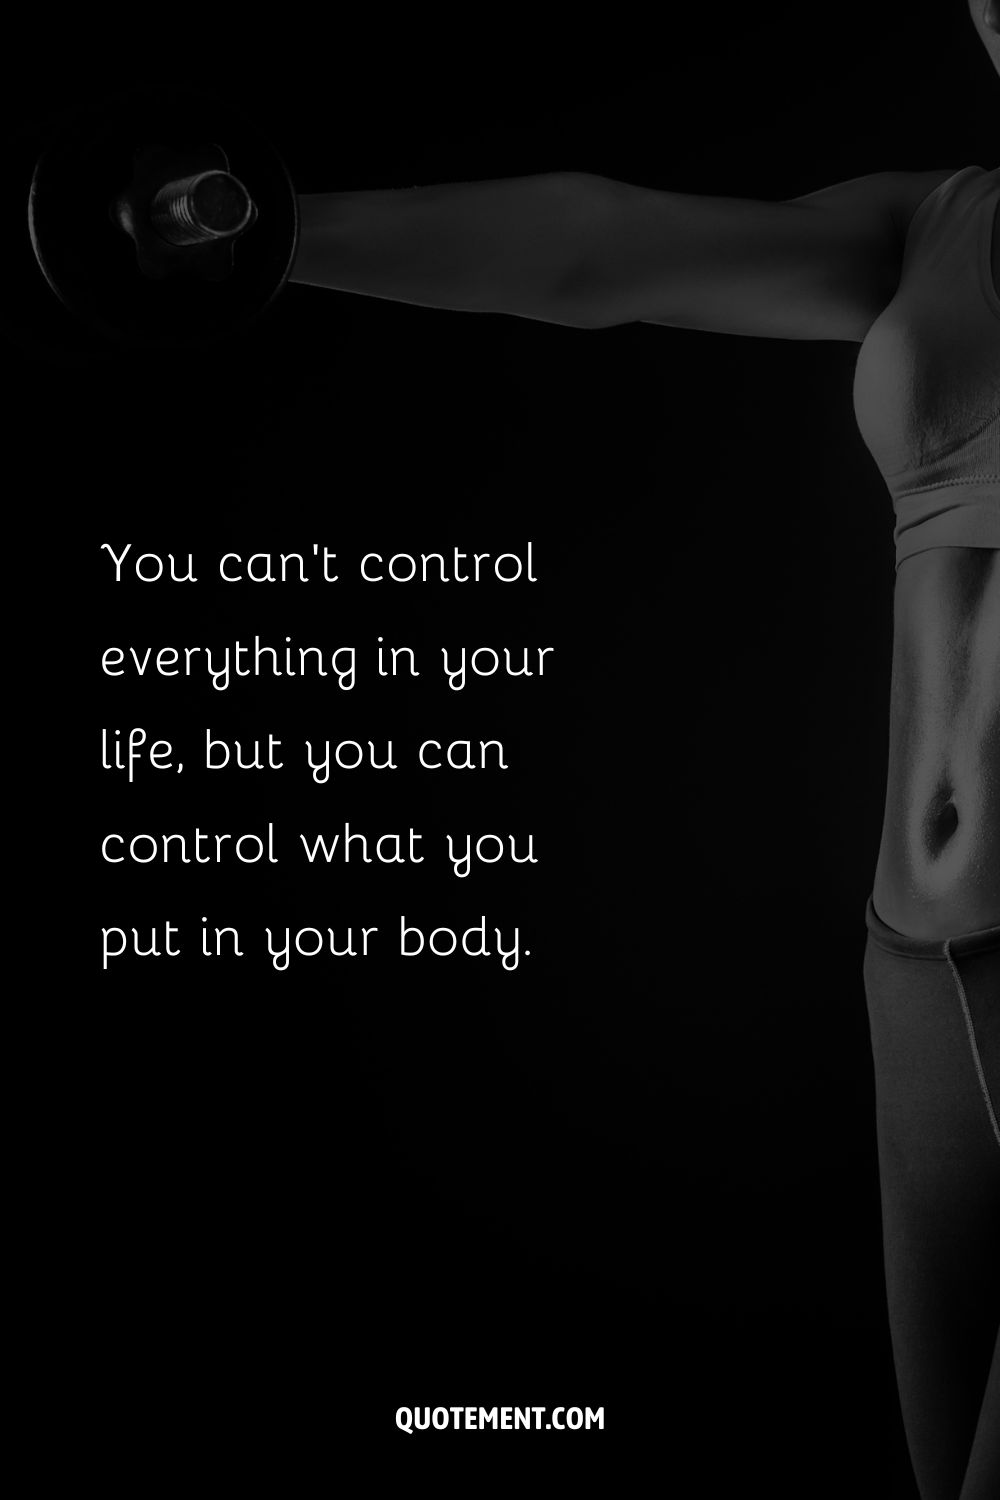 You can’t control everything in your life, but you can control what you put in your body.